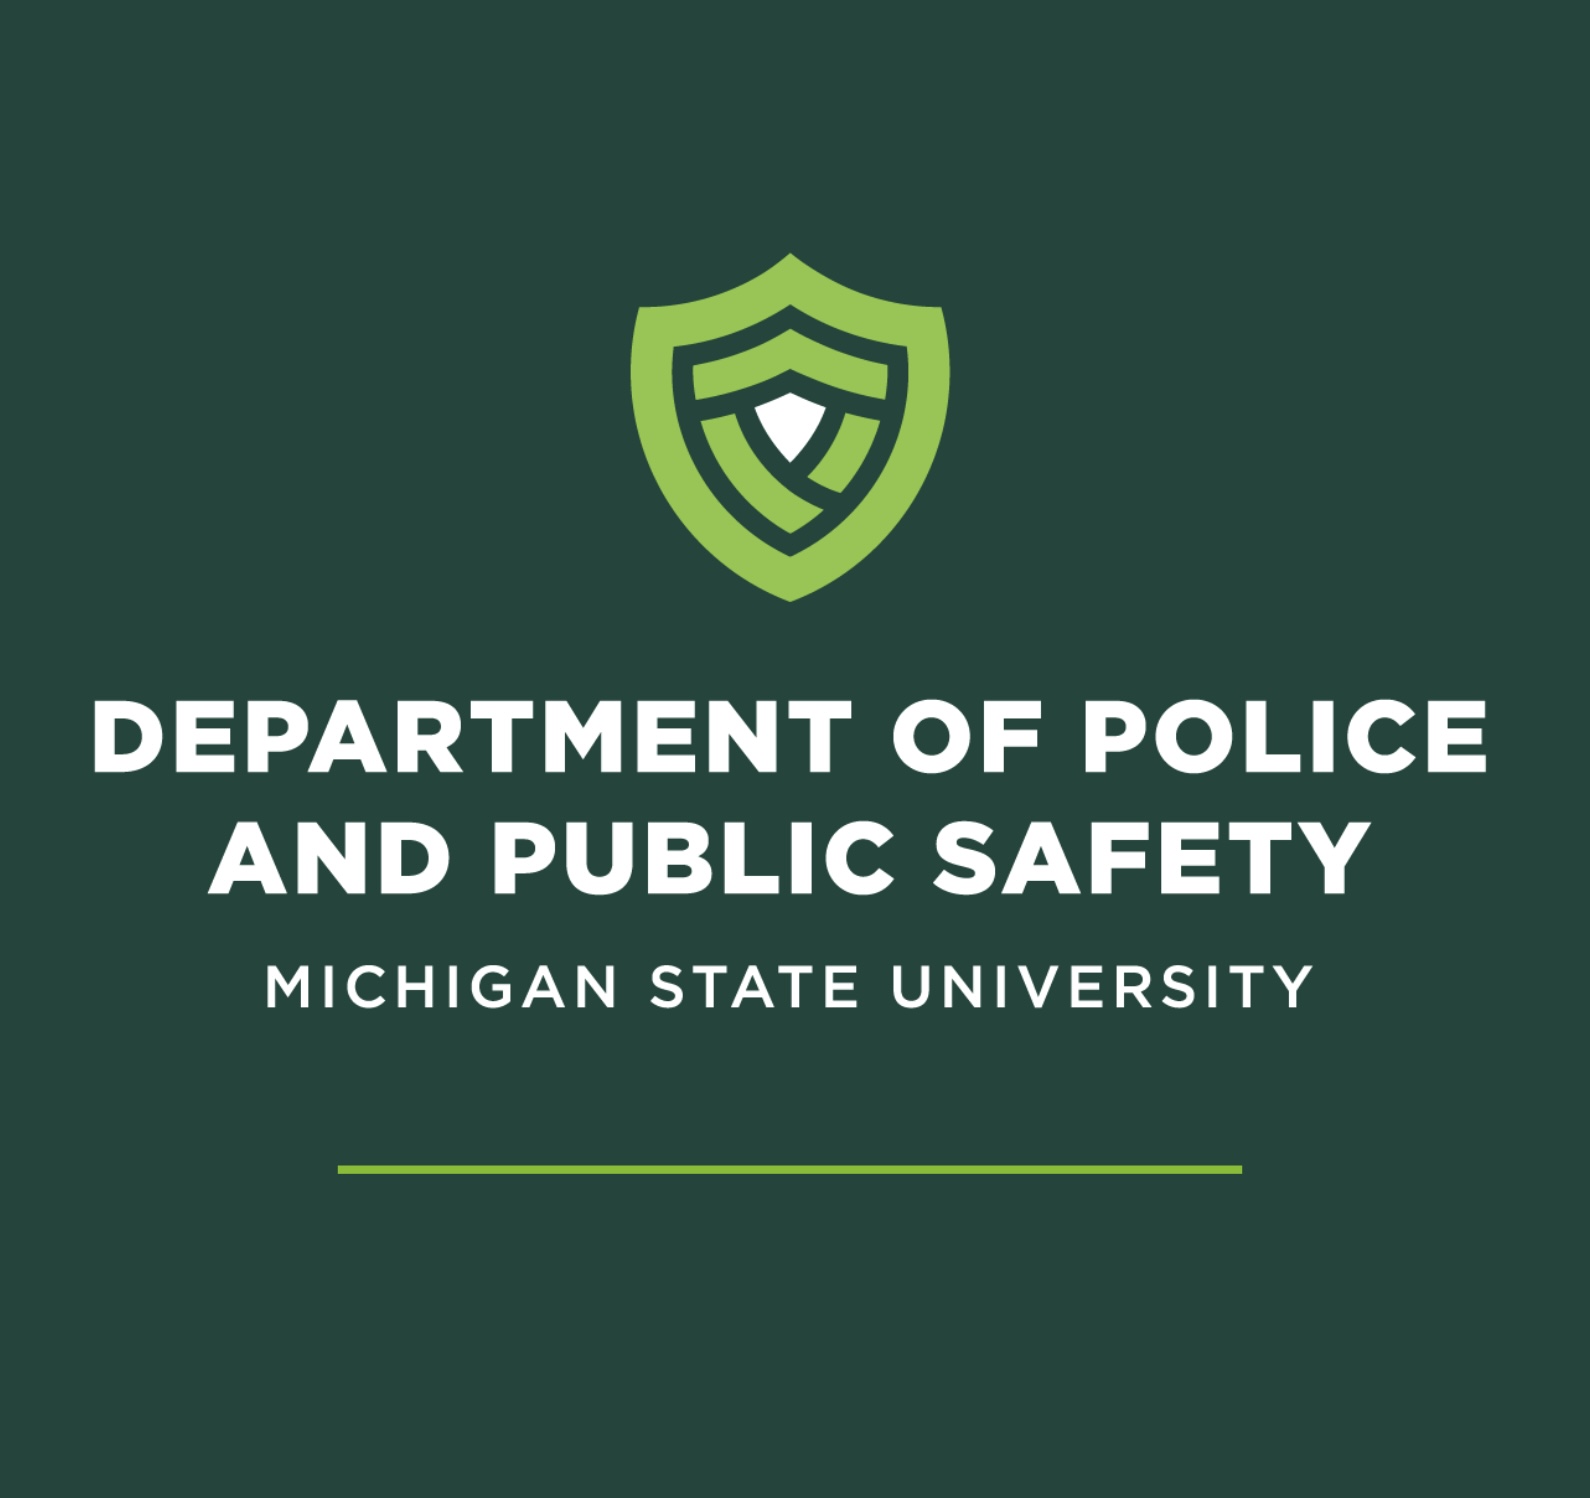 DPPS logo in lime green with Spartan green background and text that says "Department of Police and Public Safety Michigan State University"